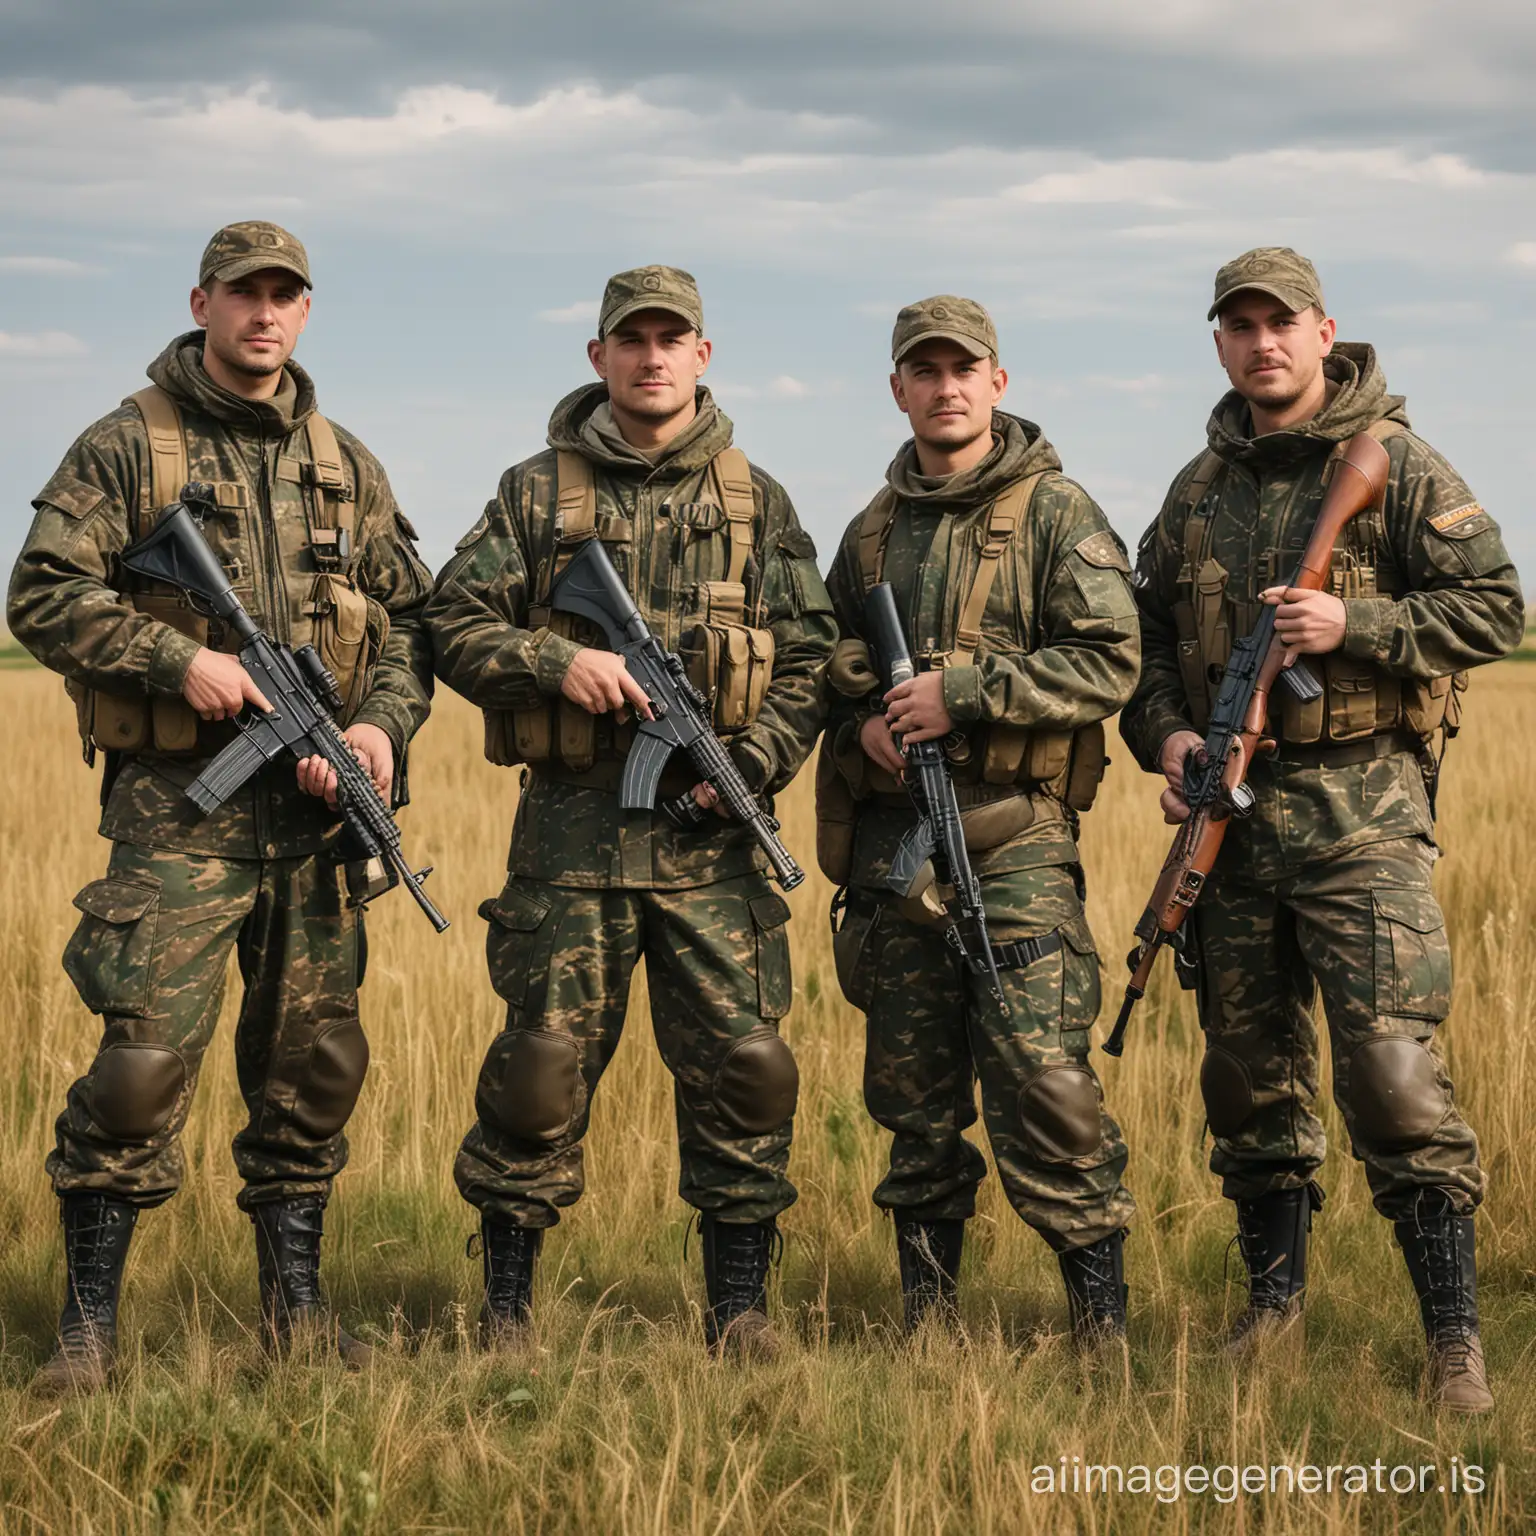 Four-Hunters-Standing-in-Camouflage-with-Beer-and-Weapons-in-Field